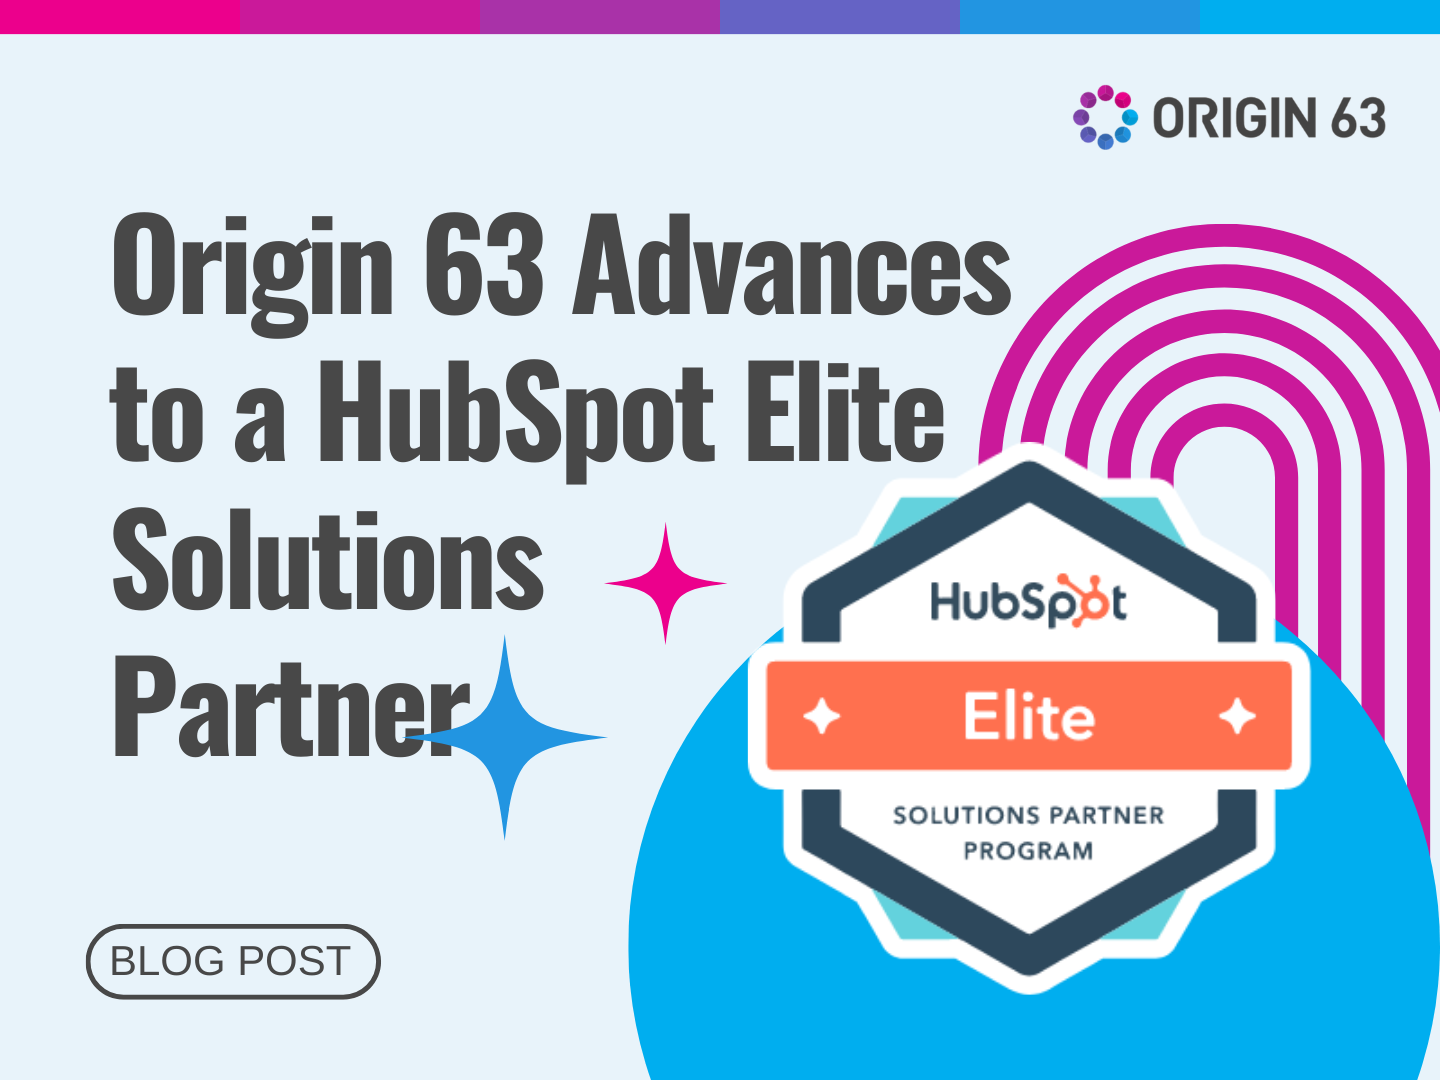 Origin 63 is named a HubSpot Elite Partner, the highest tier recognizing exceptional expertise and client success.